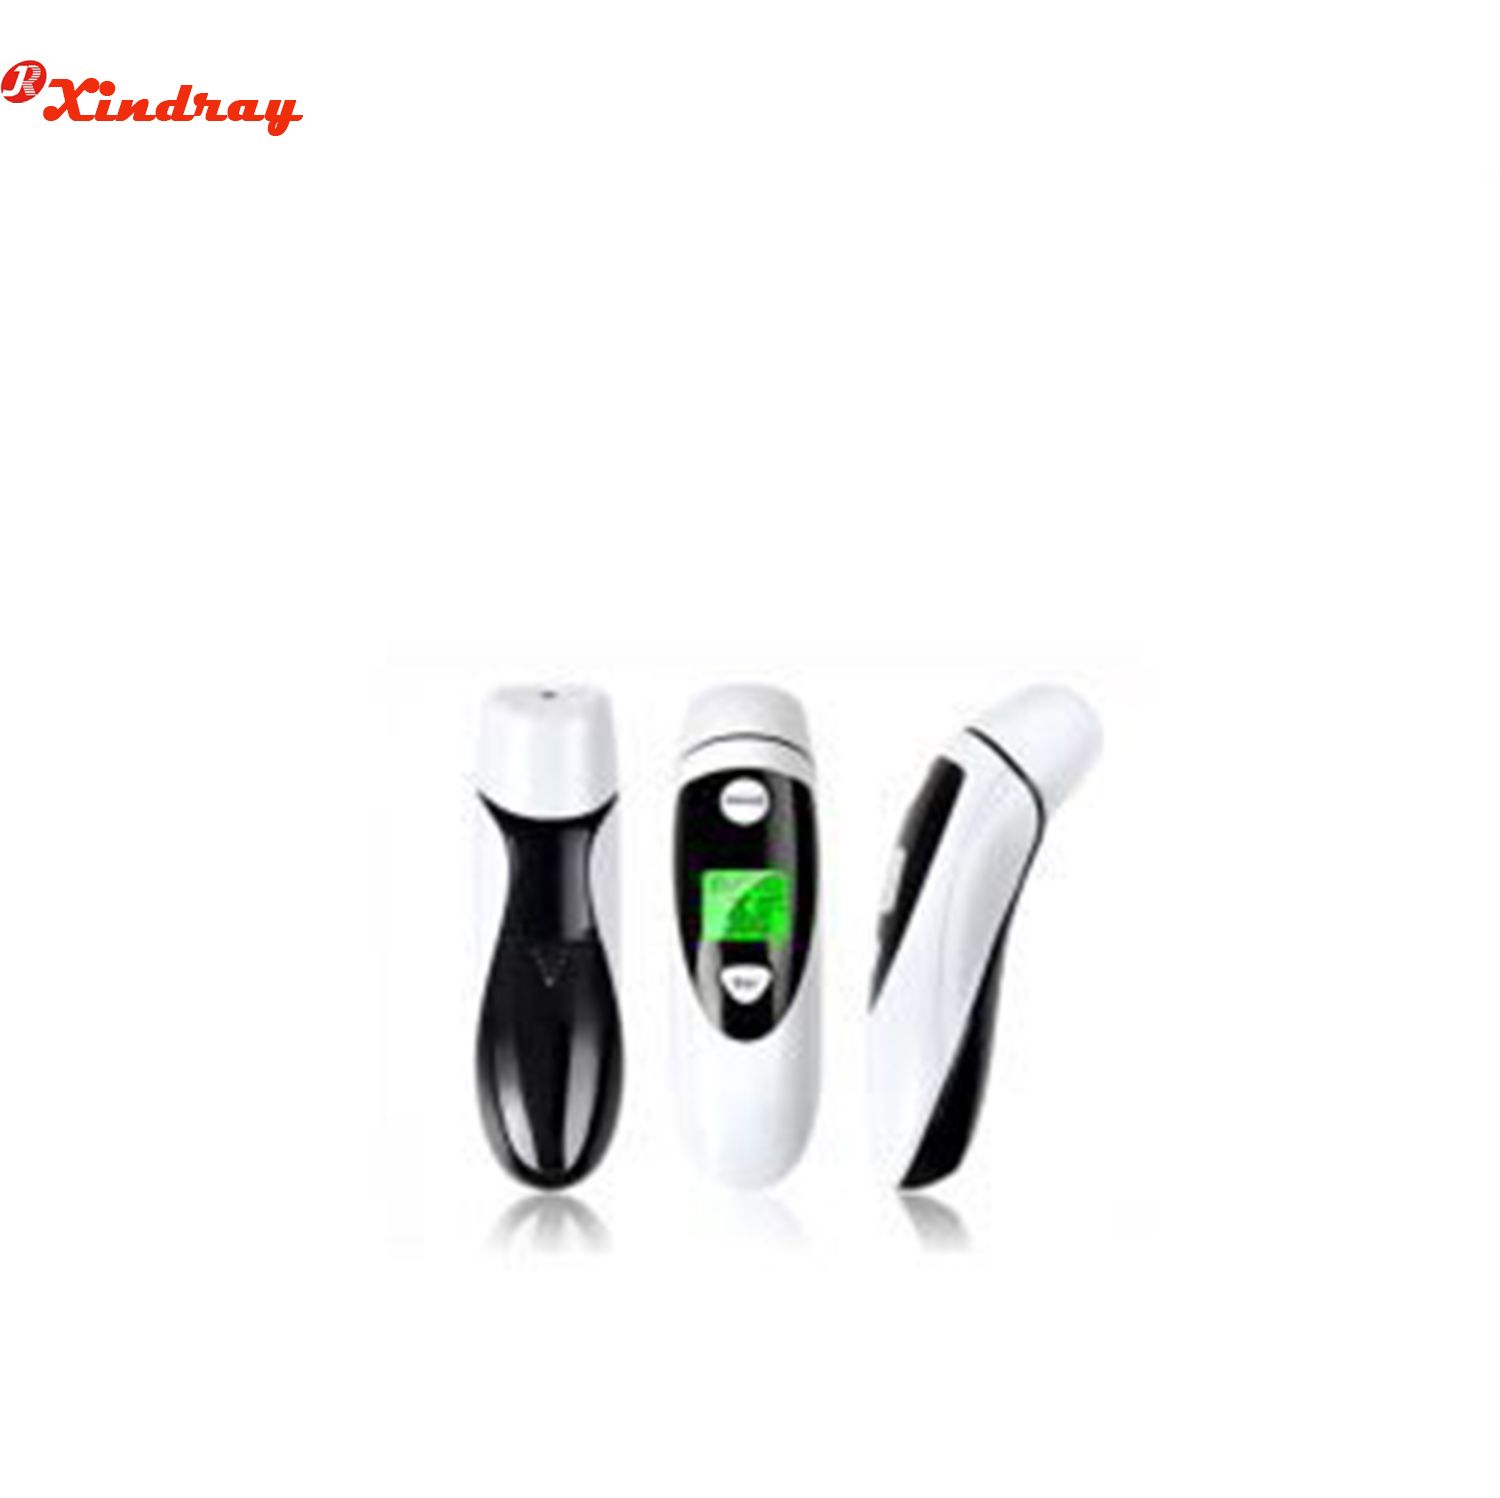 Infrared Dual Mode Body Thermometer